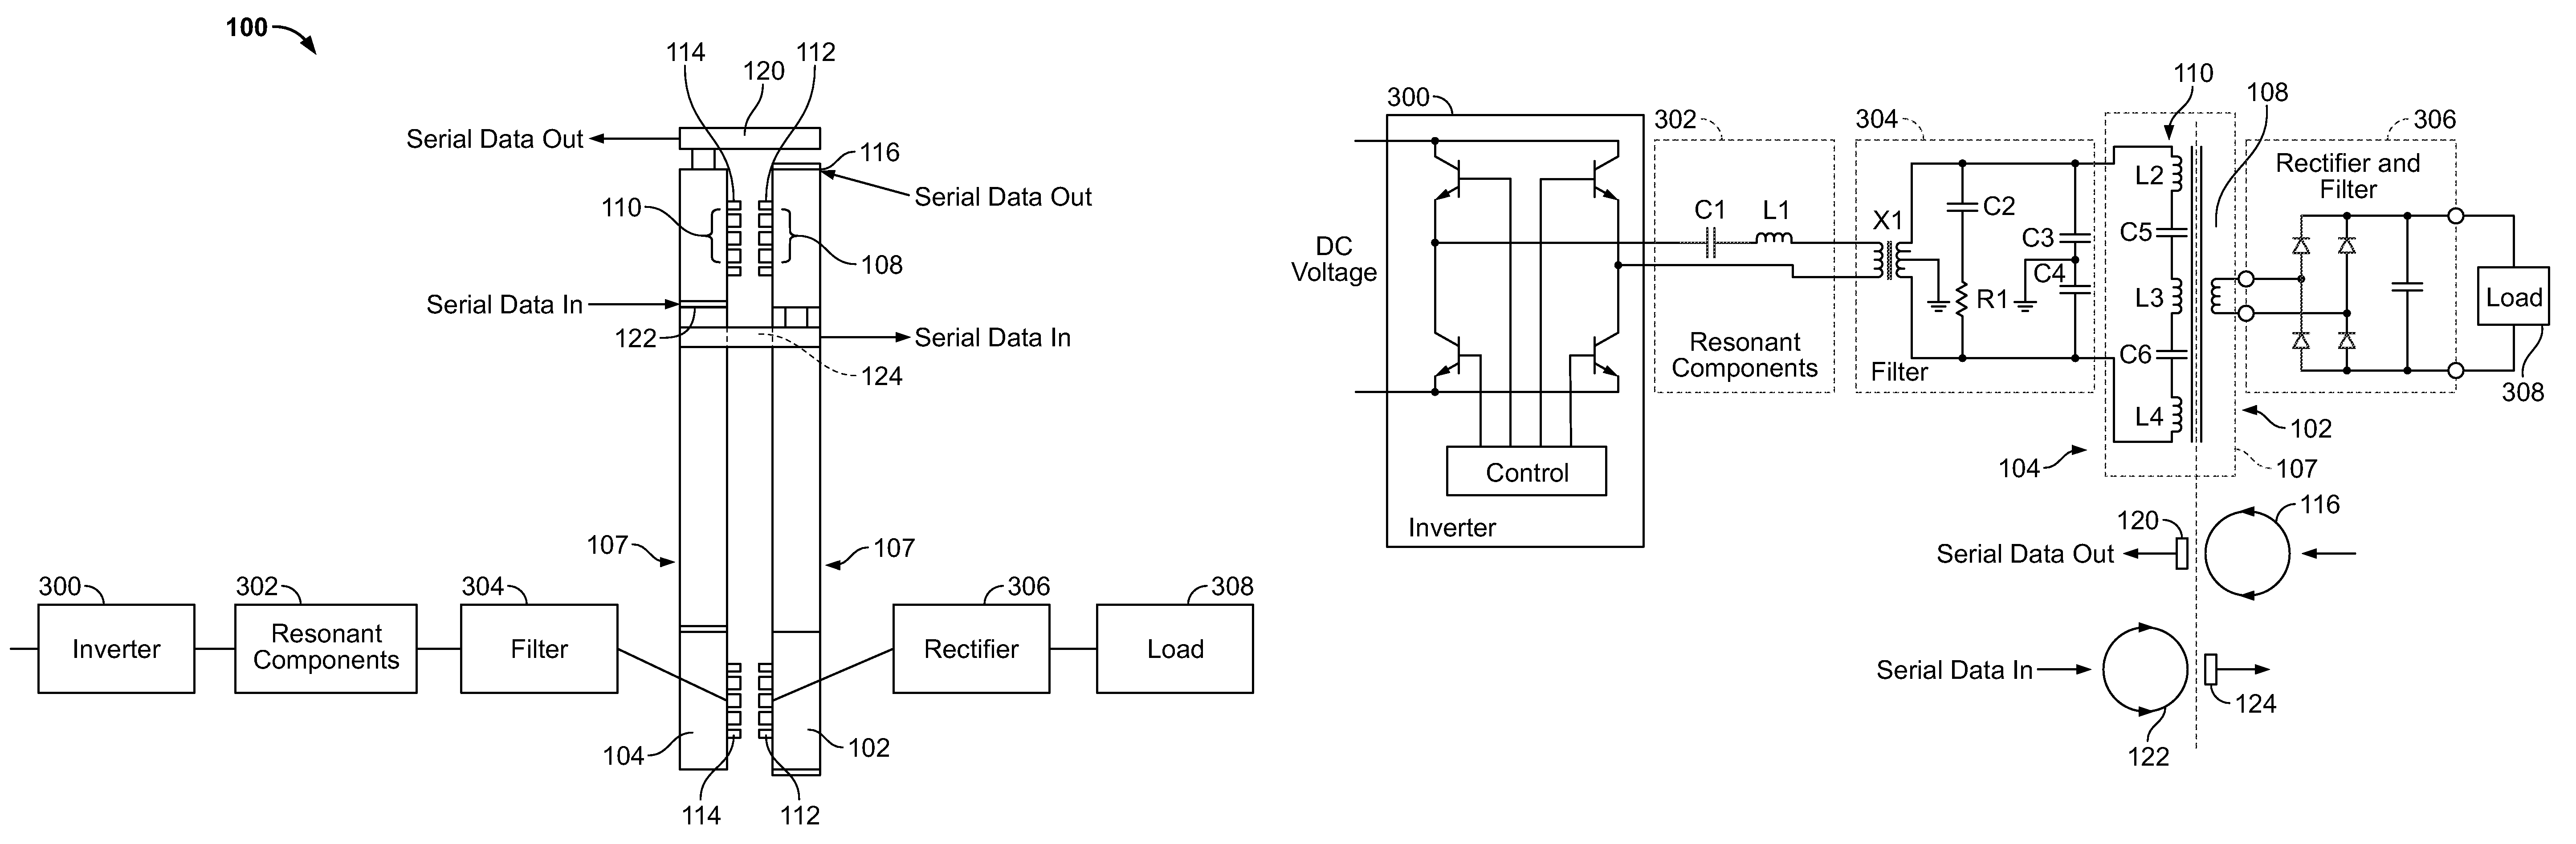 Contactless power and data transmission apparatus